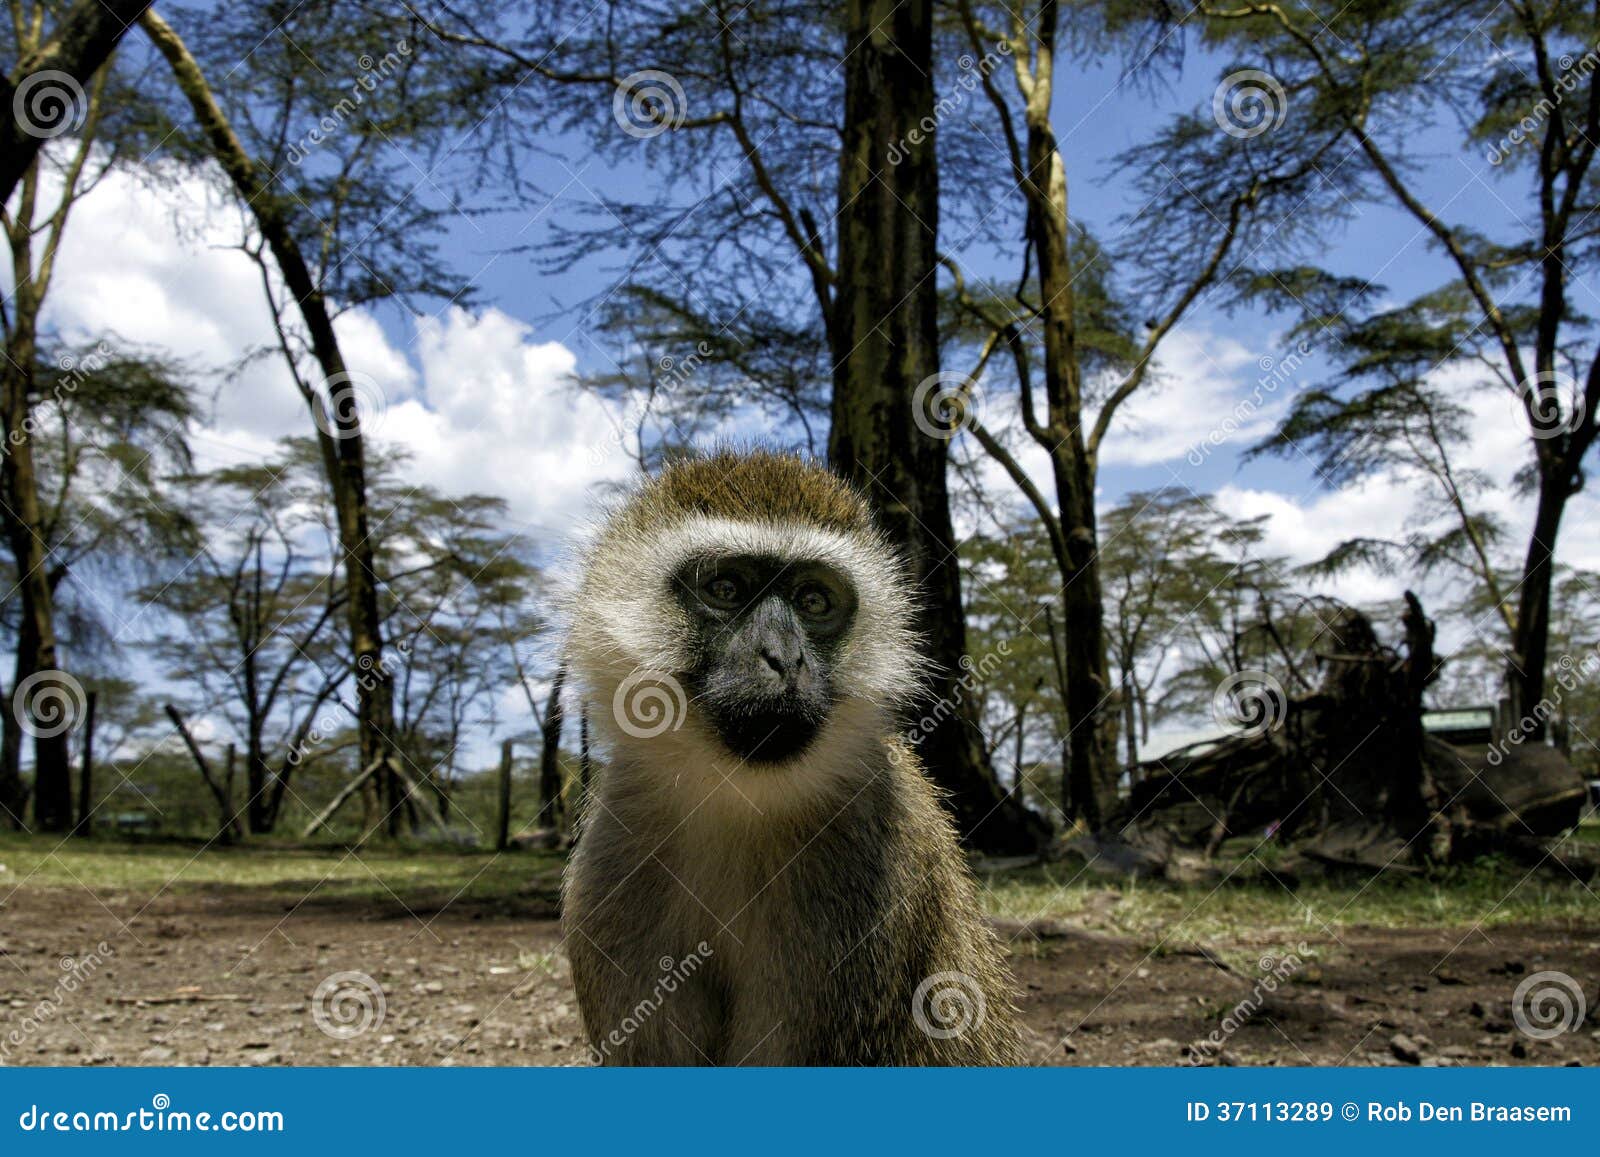 Small monkey looking in camera